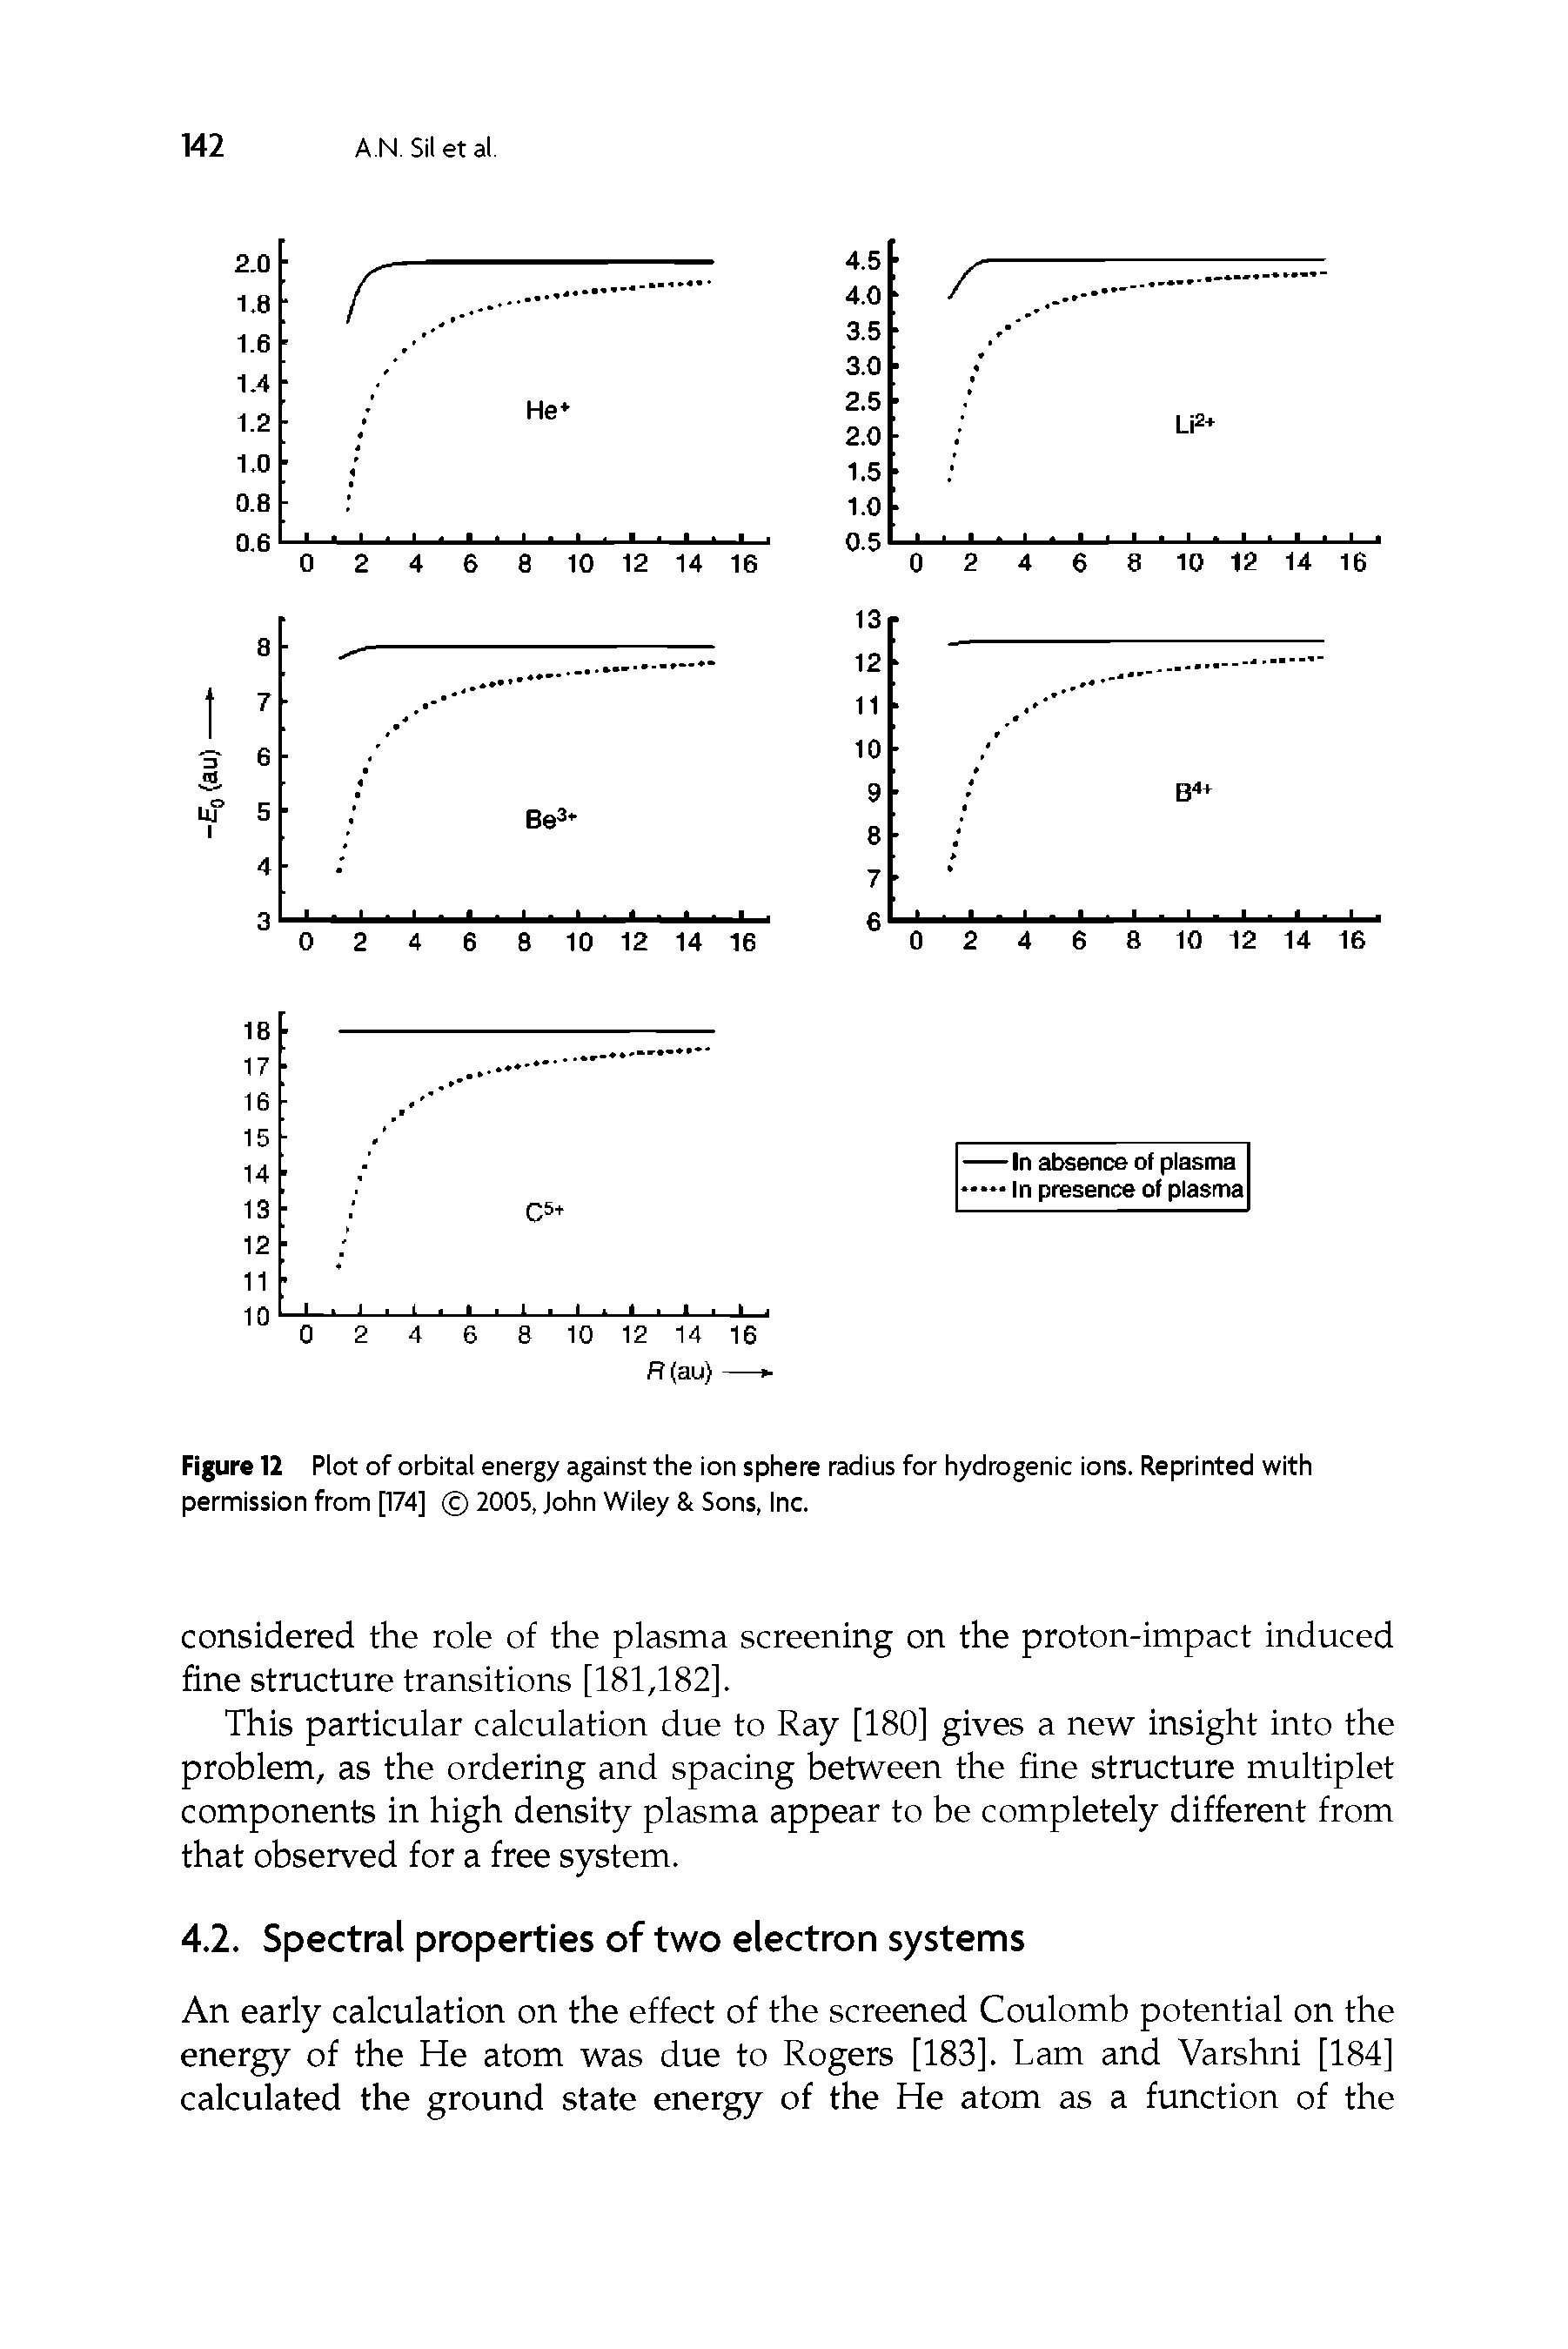 Figure 12 Plot of orbital energy against the ion sphere radius for hydrogenic ions. Reprinted with permission from [174] 2005, John Wiley Sons, Inc.